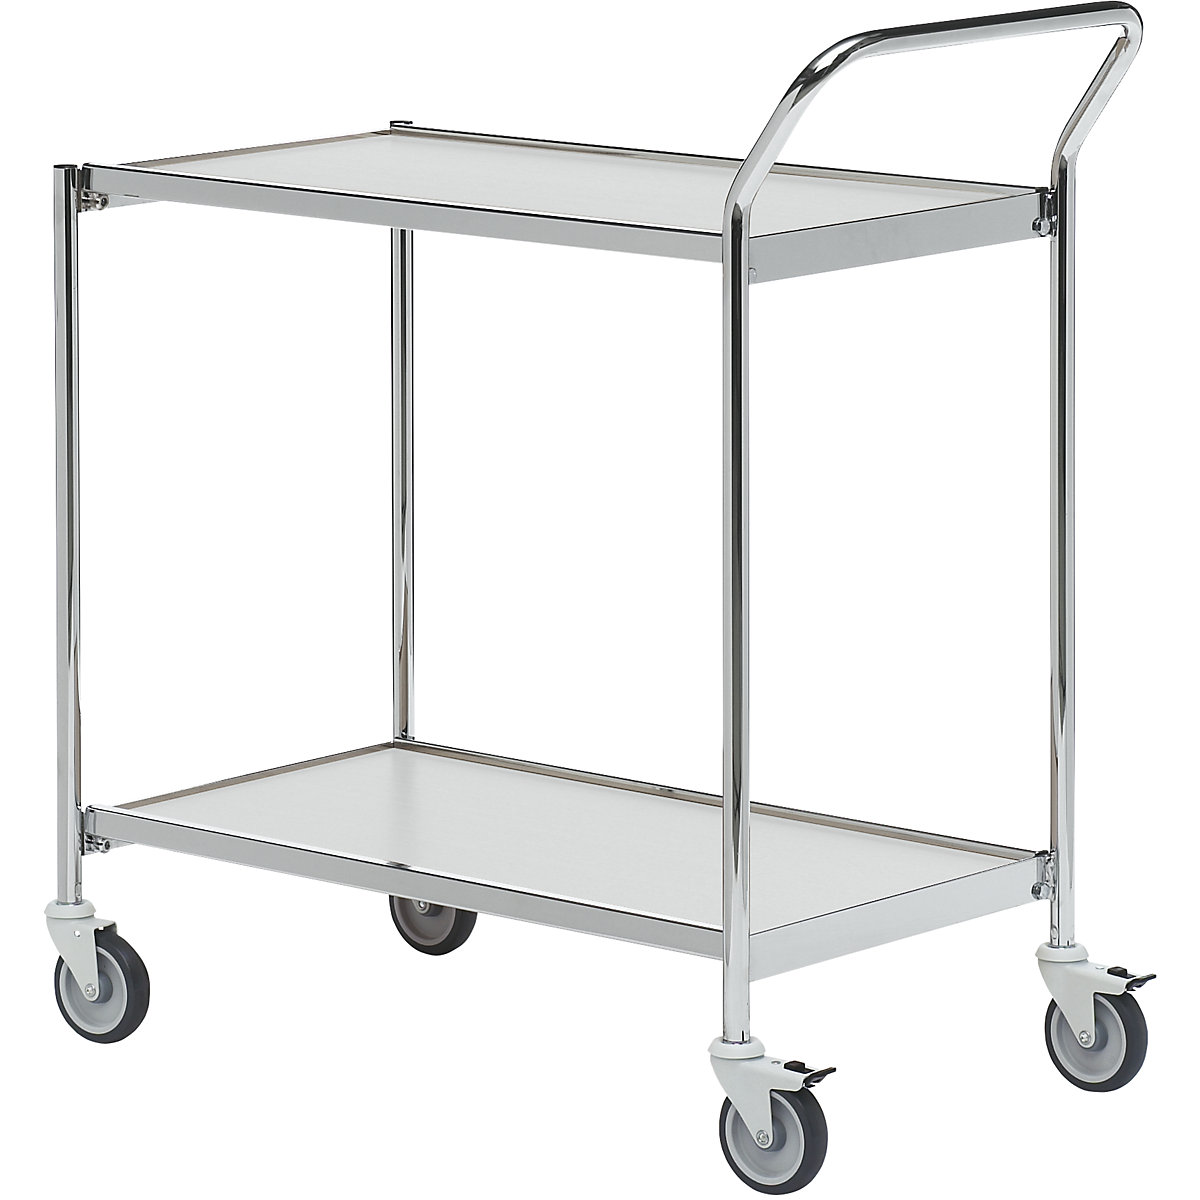 Table trolley – HelgeNyberg, 2 shelves, LxW 1000 x 420 mm, chrome/grey, 5+ items-21